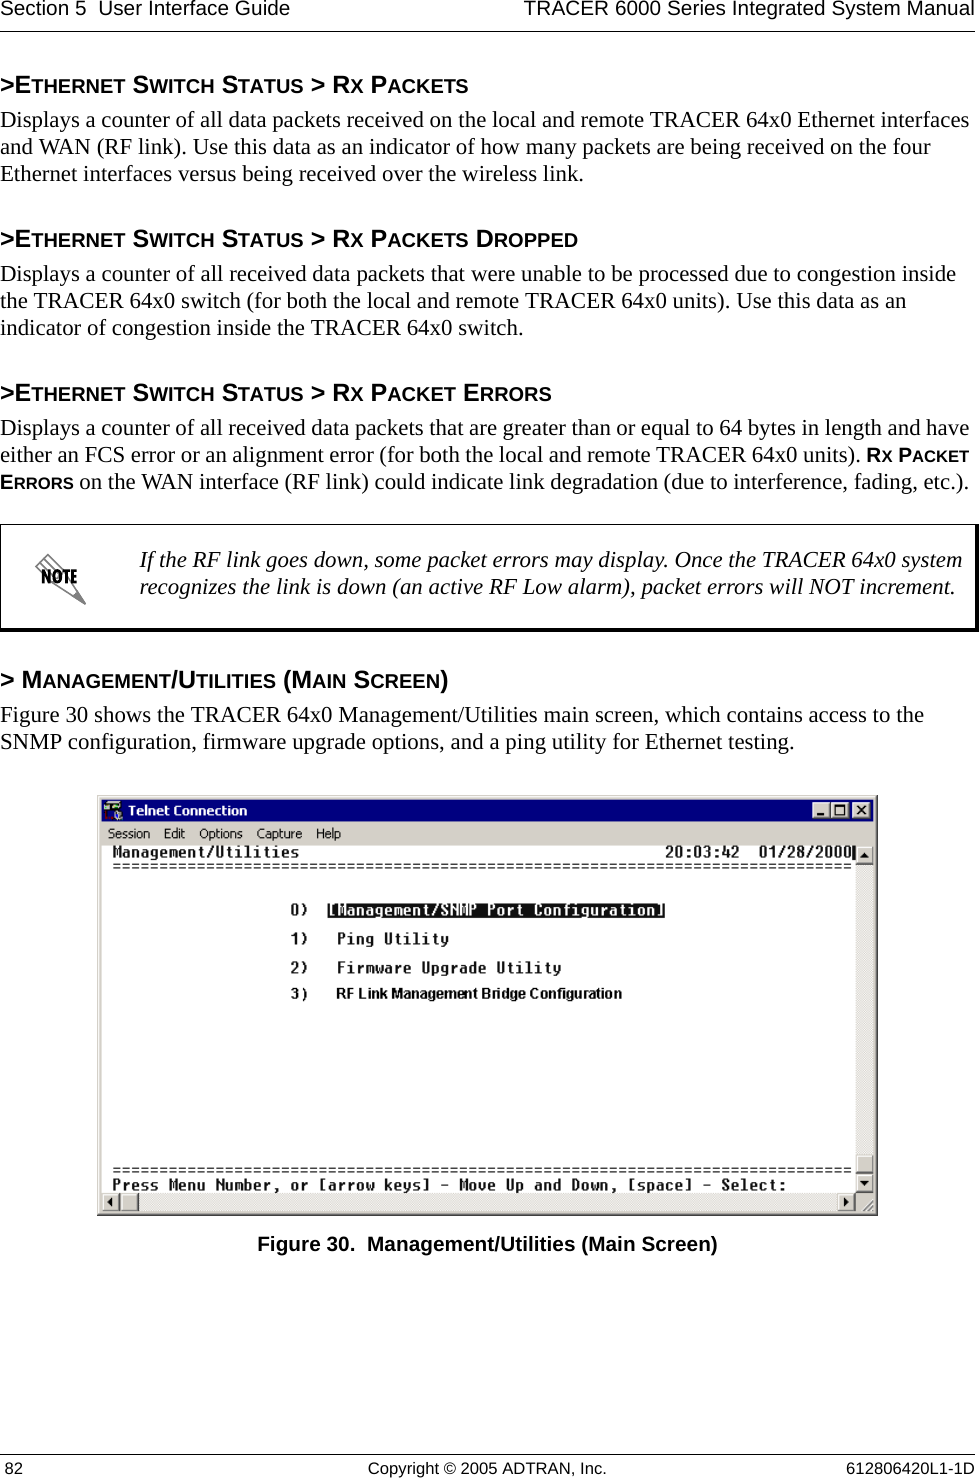 Section 5  User Interface Guide TRACER 6000 Series Integrated System Manual 82 Copyright © 2005 ADTRAN, Inc. 612806420L1-1D&gt;ETHERNET SWITCH STATUS &gt; RX PACKETSDisplays a counter of all data packets received on the local and remote TRACER 64x0 Ethernet interfaces and WAN (RF link). Use this data as an indicator of how many packets are being received on the four Ethernet interfaces versus being received over the wireless link.&gt;ETHERNET SWITCH STATUS &gt; RX PACKETS DROPPEDDisplays a counter of all received data packets that were unable to be processed due to congestion inside the TRACER 64x0 switch (for both the local and remote TRACER 64x0 units). Use this data as an indicator of congestion inside the TRACER 64x0 switch. &gt;ETHERNET SWITCH STATUS &gt; RX PACKET ERRORSDisplays a counter of all received data packets that are greater than or equal to 64 bytes in length and have either an FCS error or an alignment error (for both the local and remote TRACER 64x0 units). RX PACKET ERRORS on the WAN interface (RF link) could indicate link degradation (due to interference, fading, etc.). &gt; MANAGEMENT/UTILITIES (MAIN SCREEN)Figure 30 shows the TRACER 64x0 Management/Utilities main screen, which contains access to the SNMP configuration, firmware upgrade options, and a ping utility for Ethernet testing.Figure 30.  Management/Utilities (Main Screen)If the RF link goes down, some packet errors may display. Once the TRACER 64x0 system recognizes the link is down (an active RF Low alarm), packet errors will NOT increment.